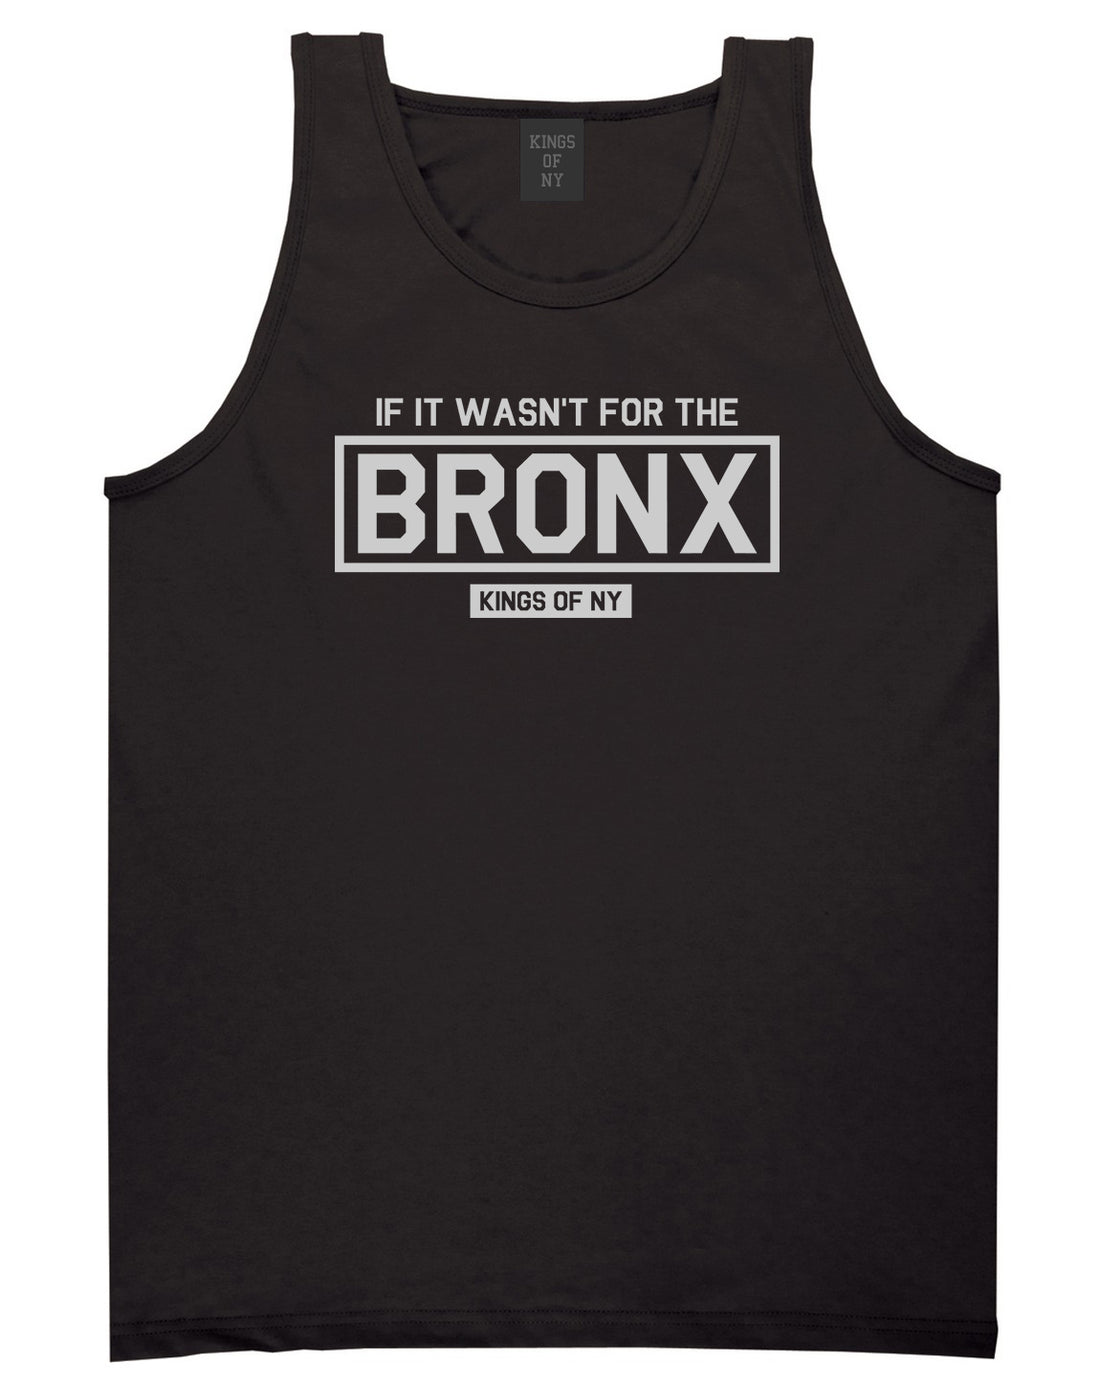 If It Wasnt For The Bronx Mens Tank Top Shirt Black by Kings Of NY